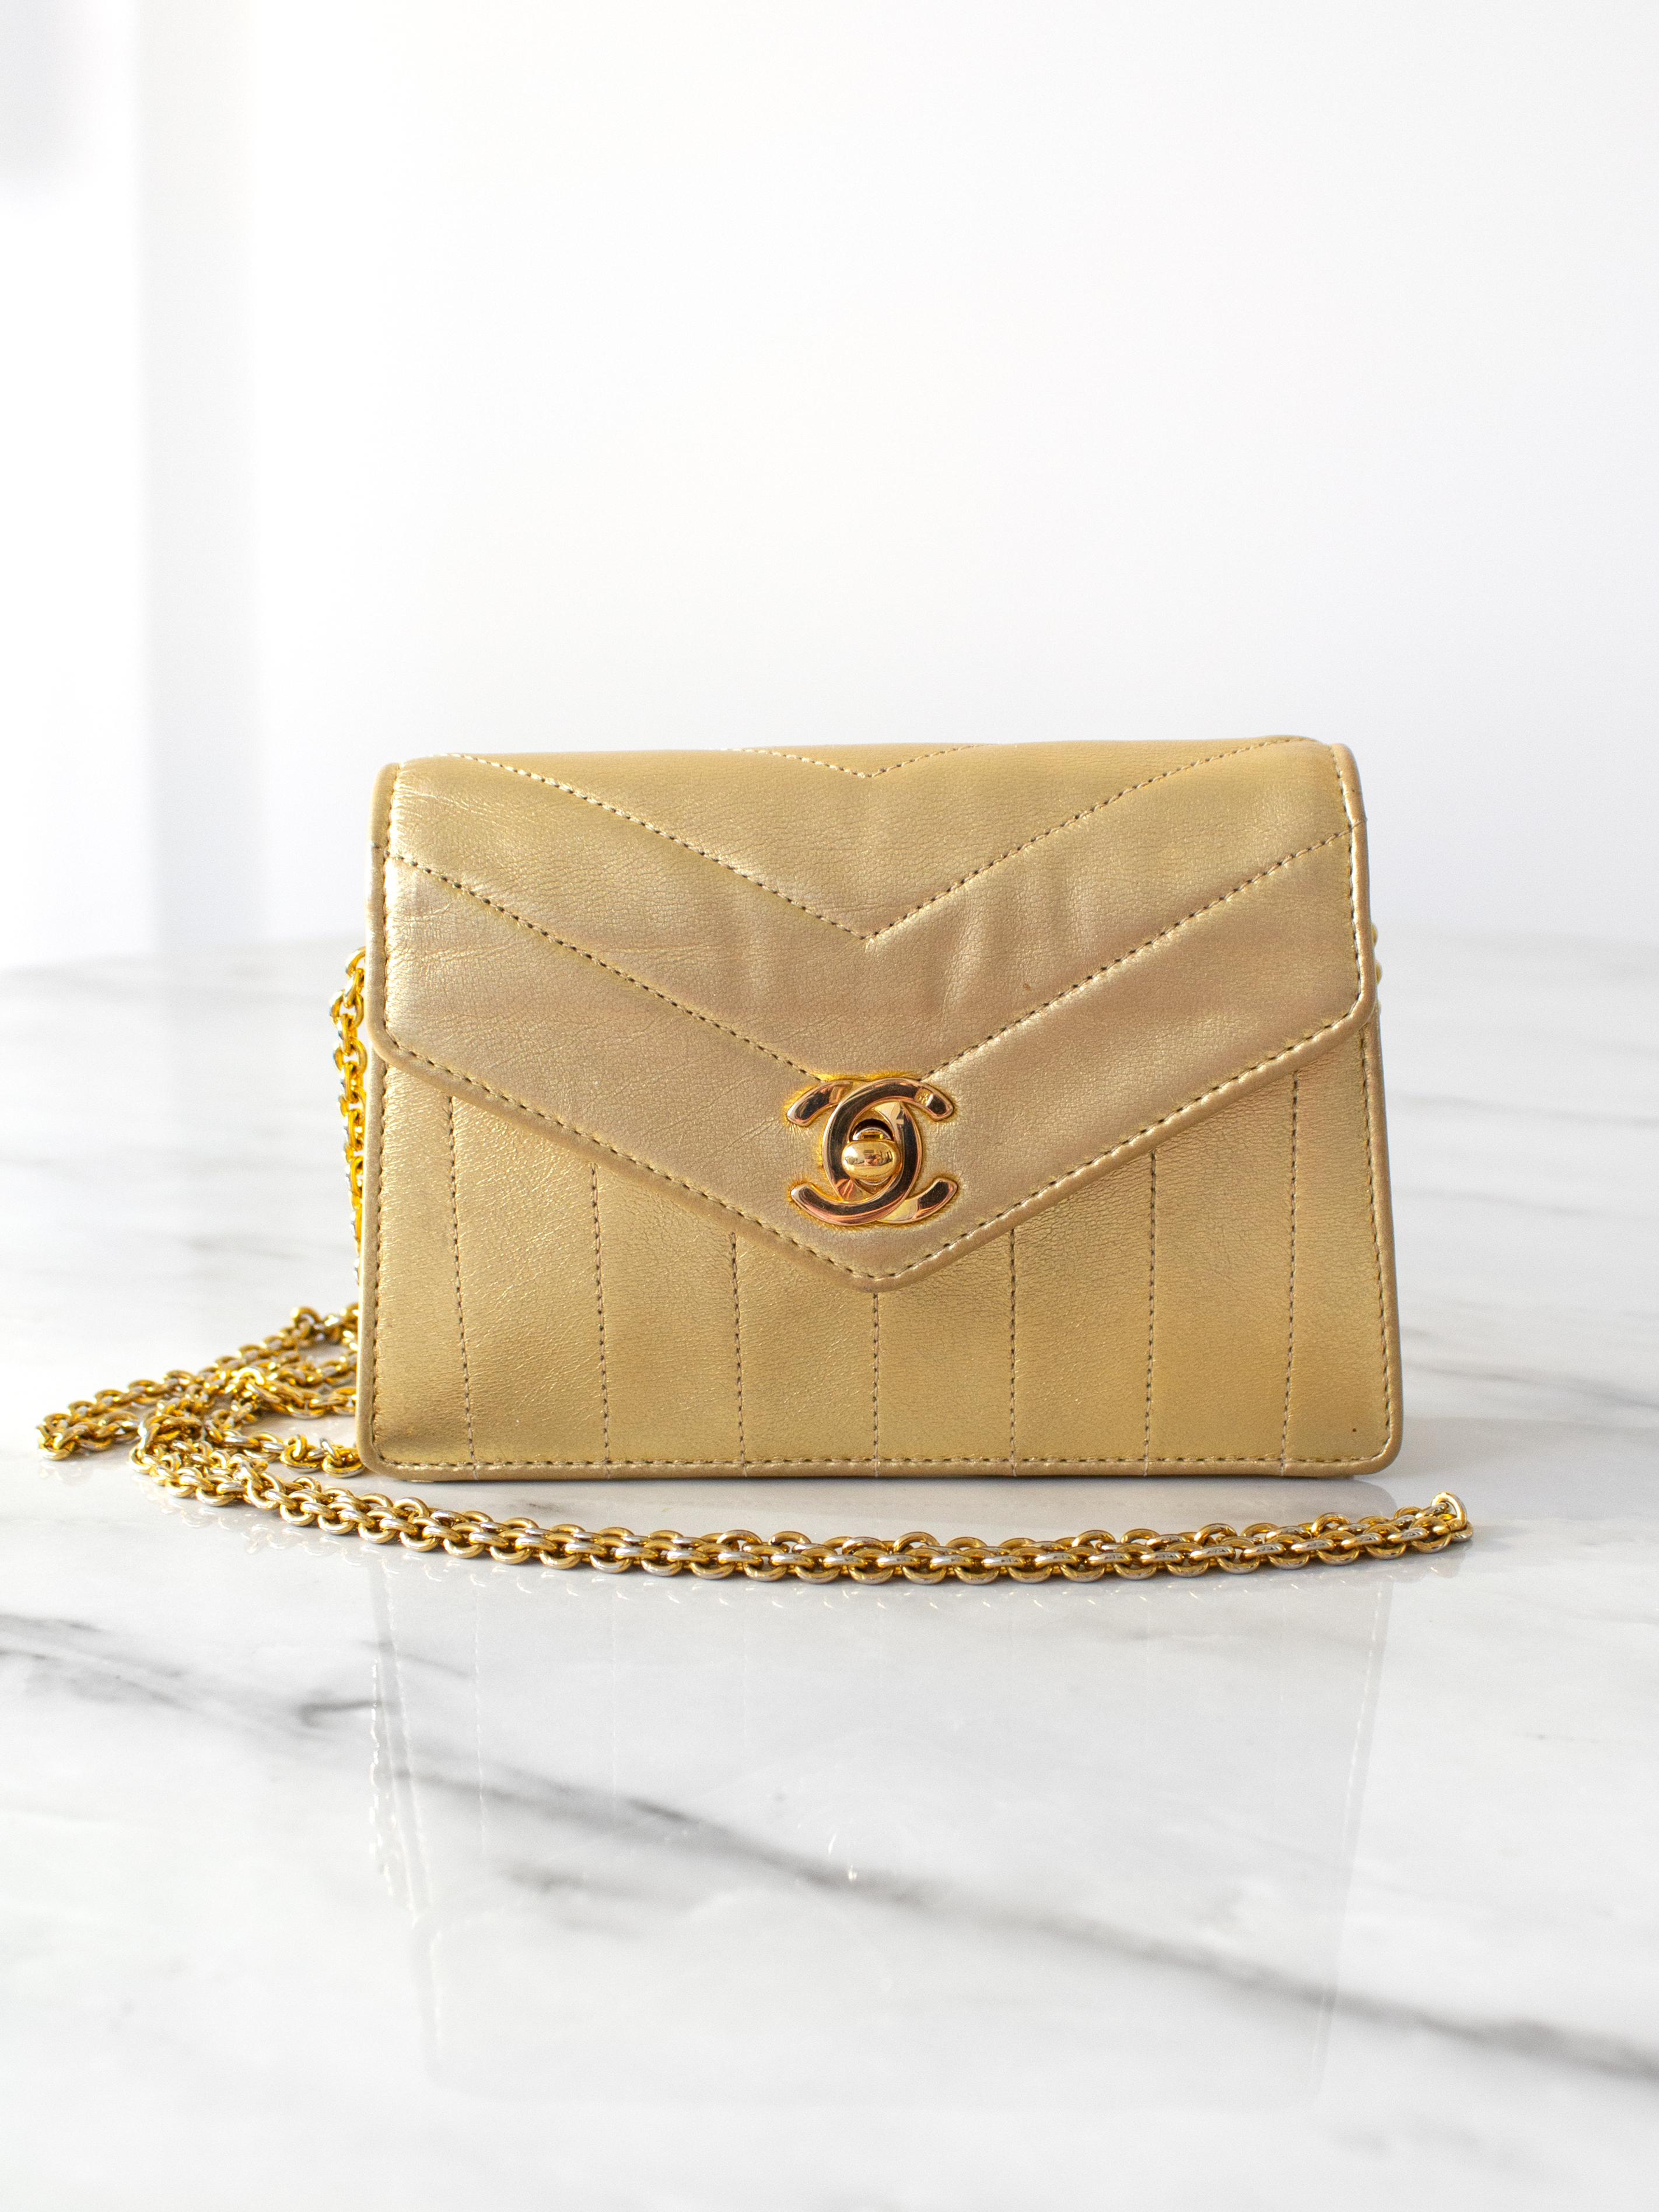 This vintage Chanel mini trapezoid bag from 1980s is a dazzling piece crafted from luxurious lambskin leather in a striking metallic gold hue. It features a 24K gold-plated CC turlock with a hallmark stamp and comes with a long chain strap and an